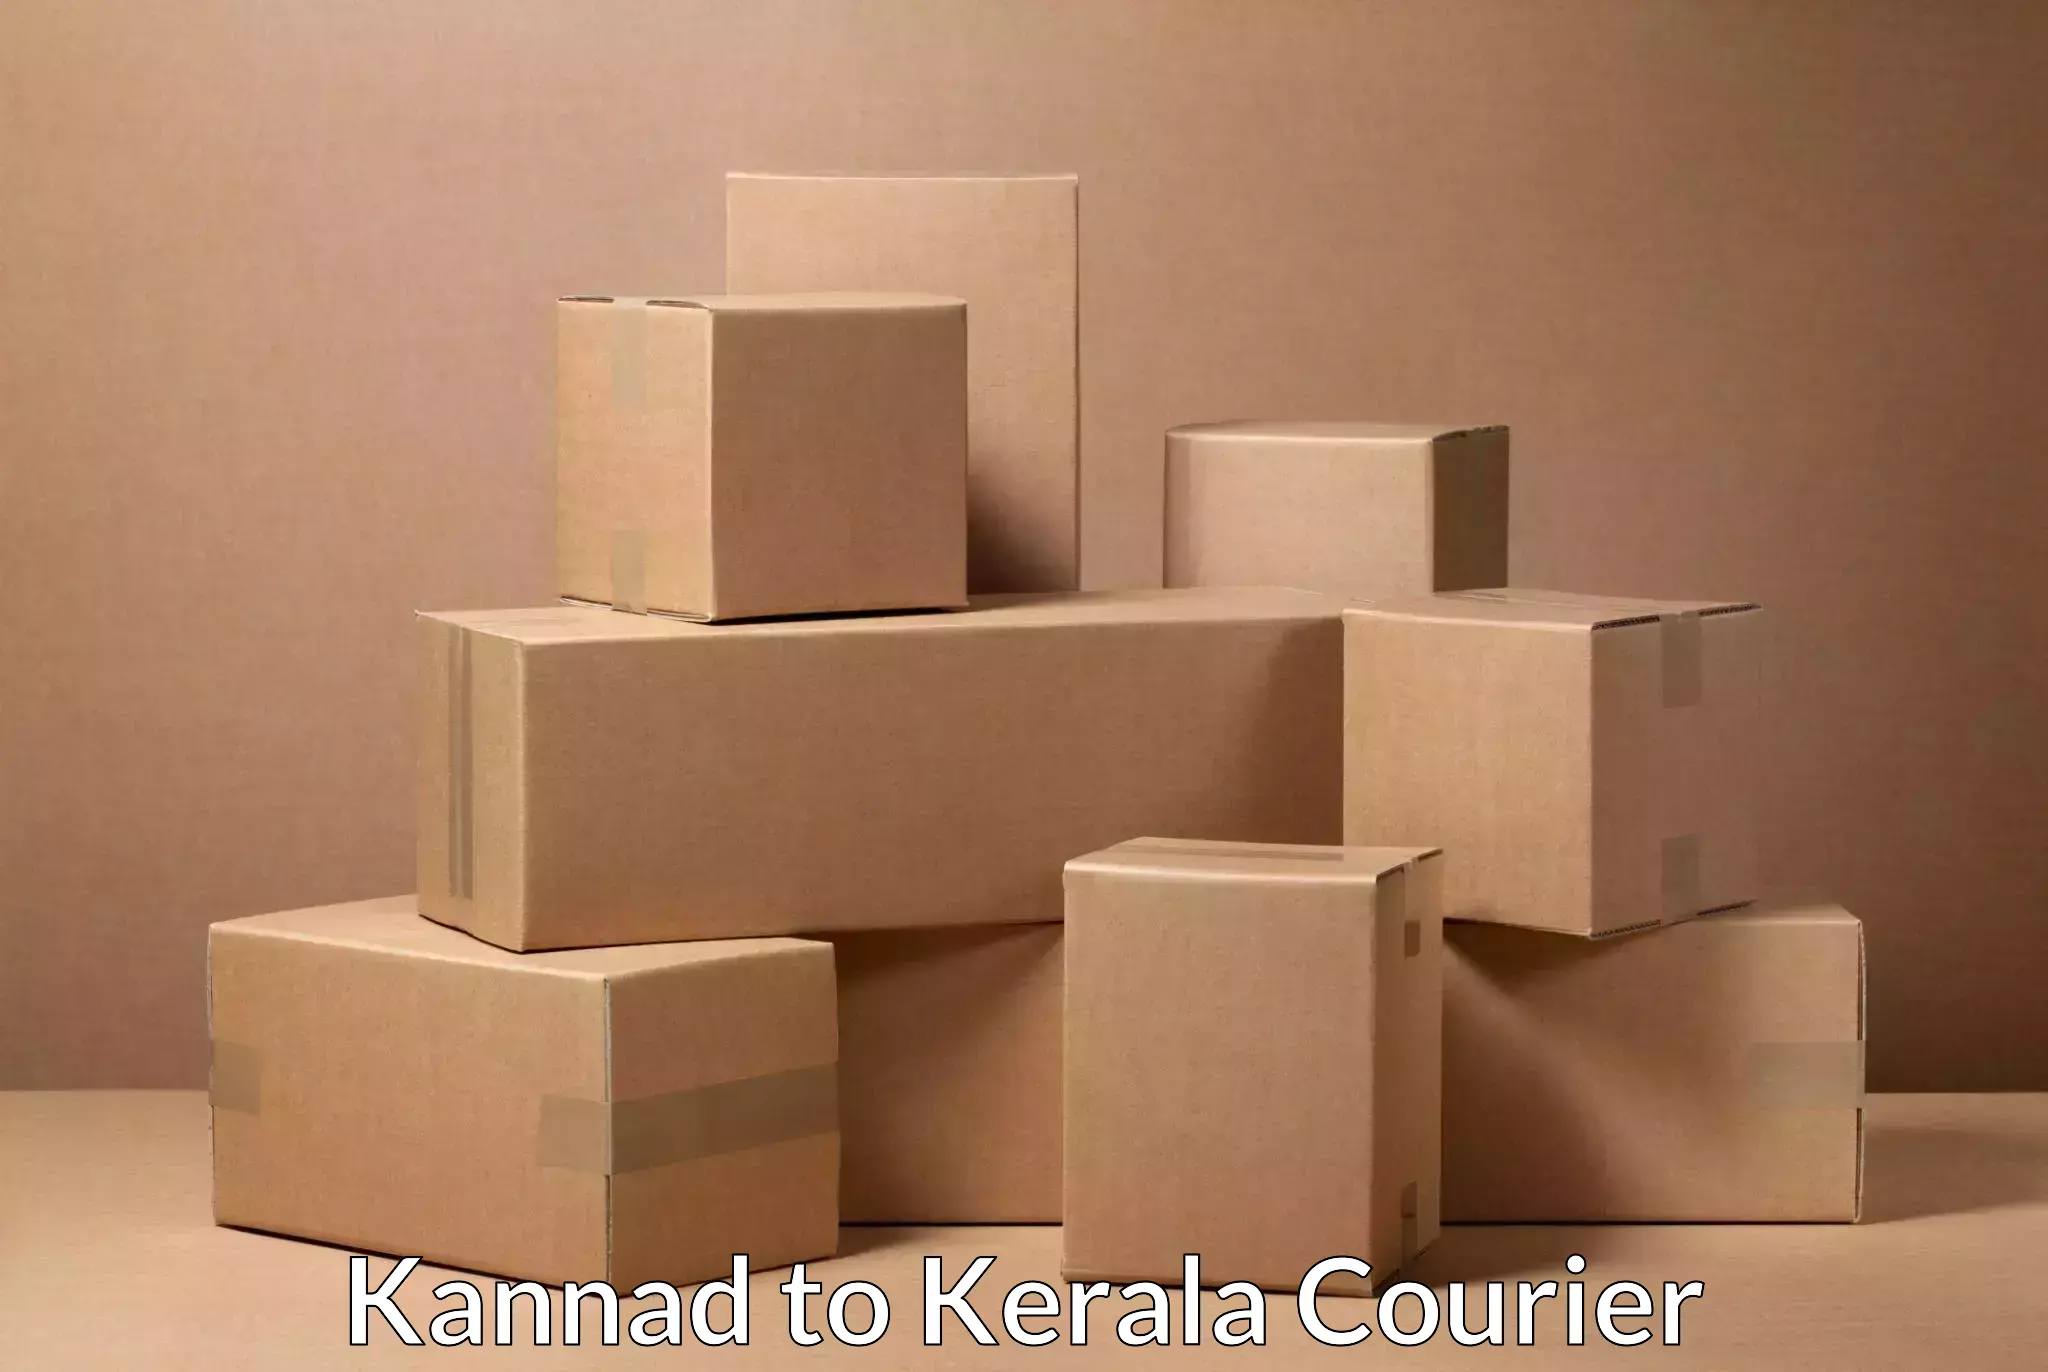 End-to-end delivery Kannad to Adoor